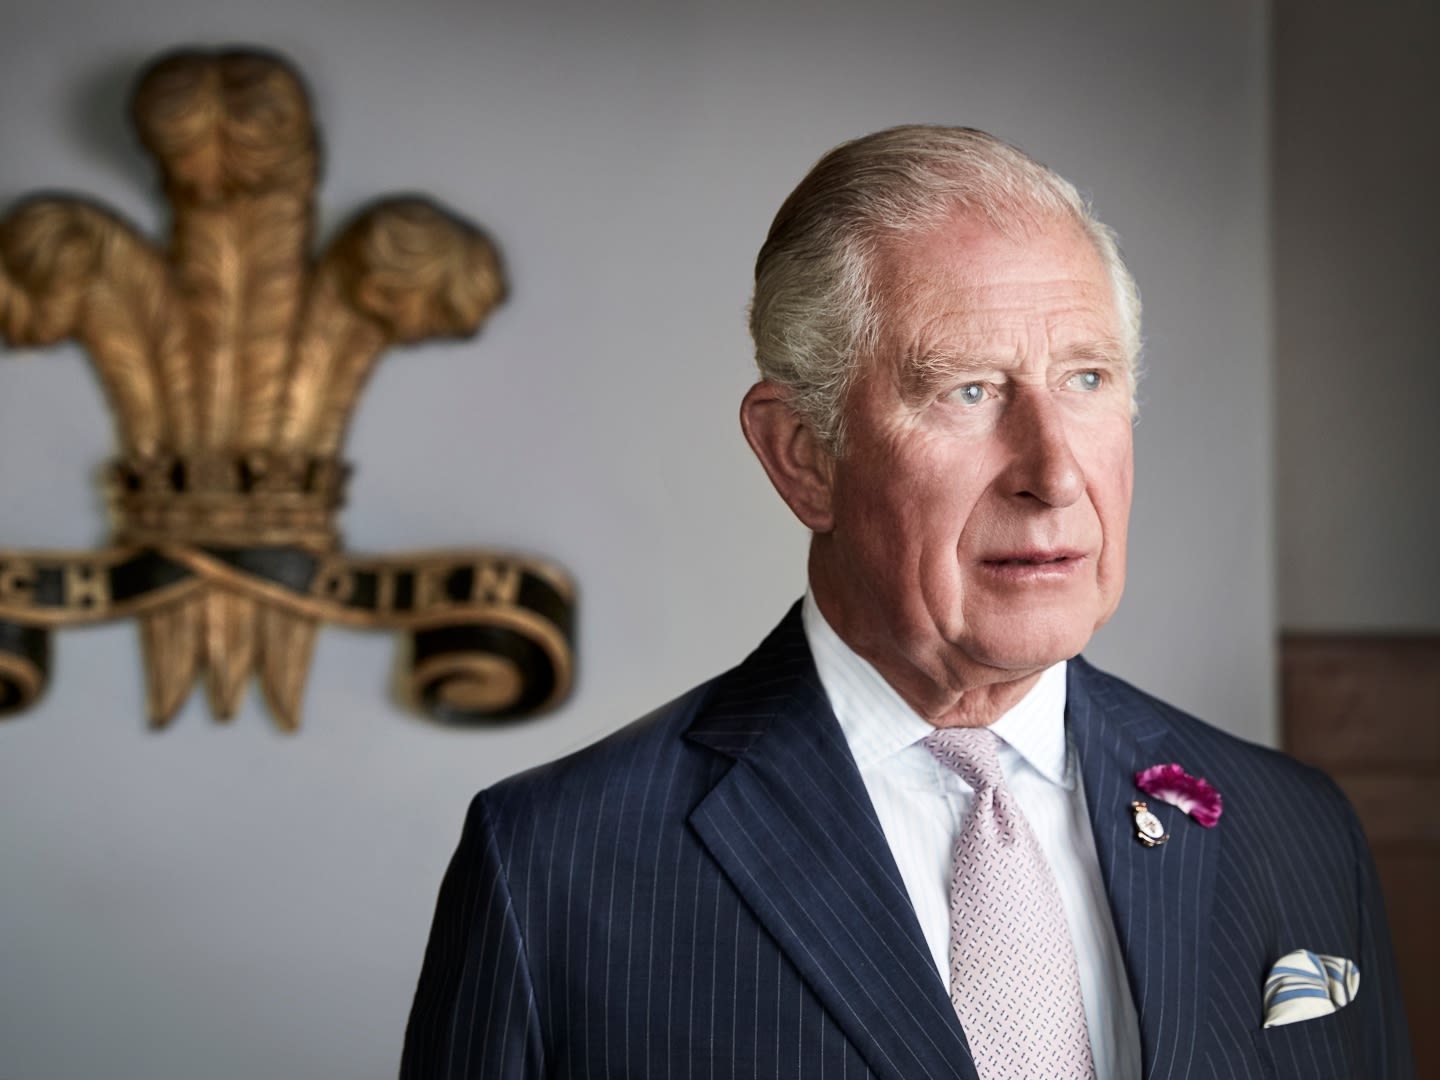 King Charles III's Team Is Reviewing Plans That Have Many Royal Insiders Worried About His Health